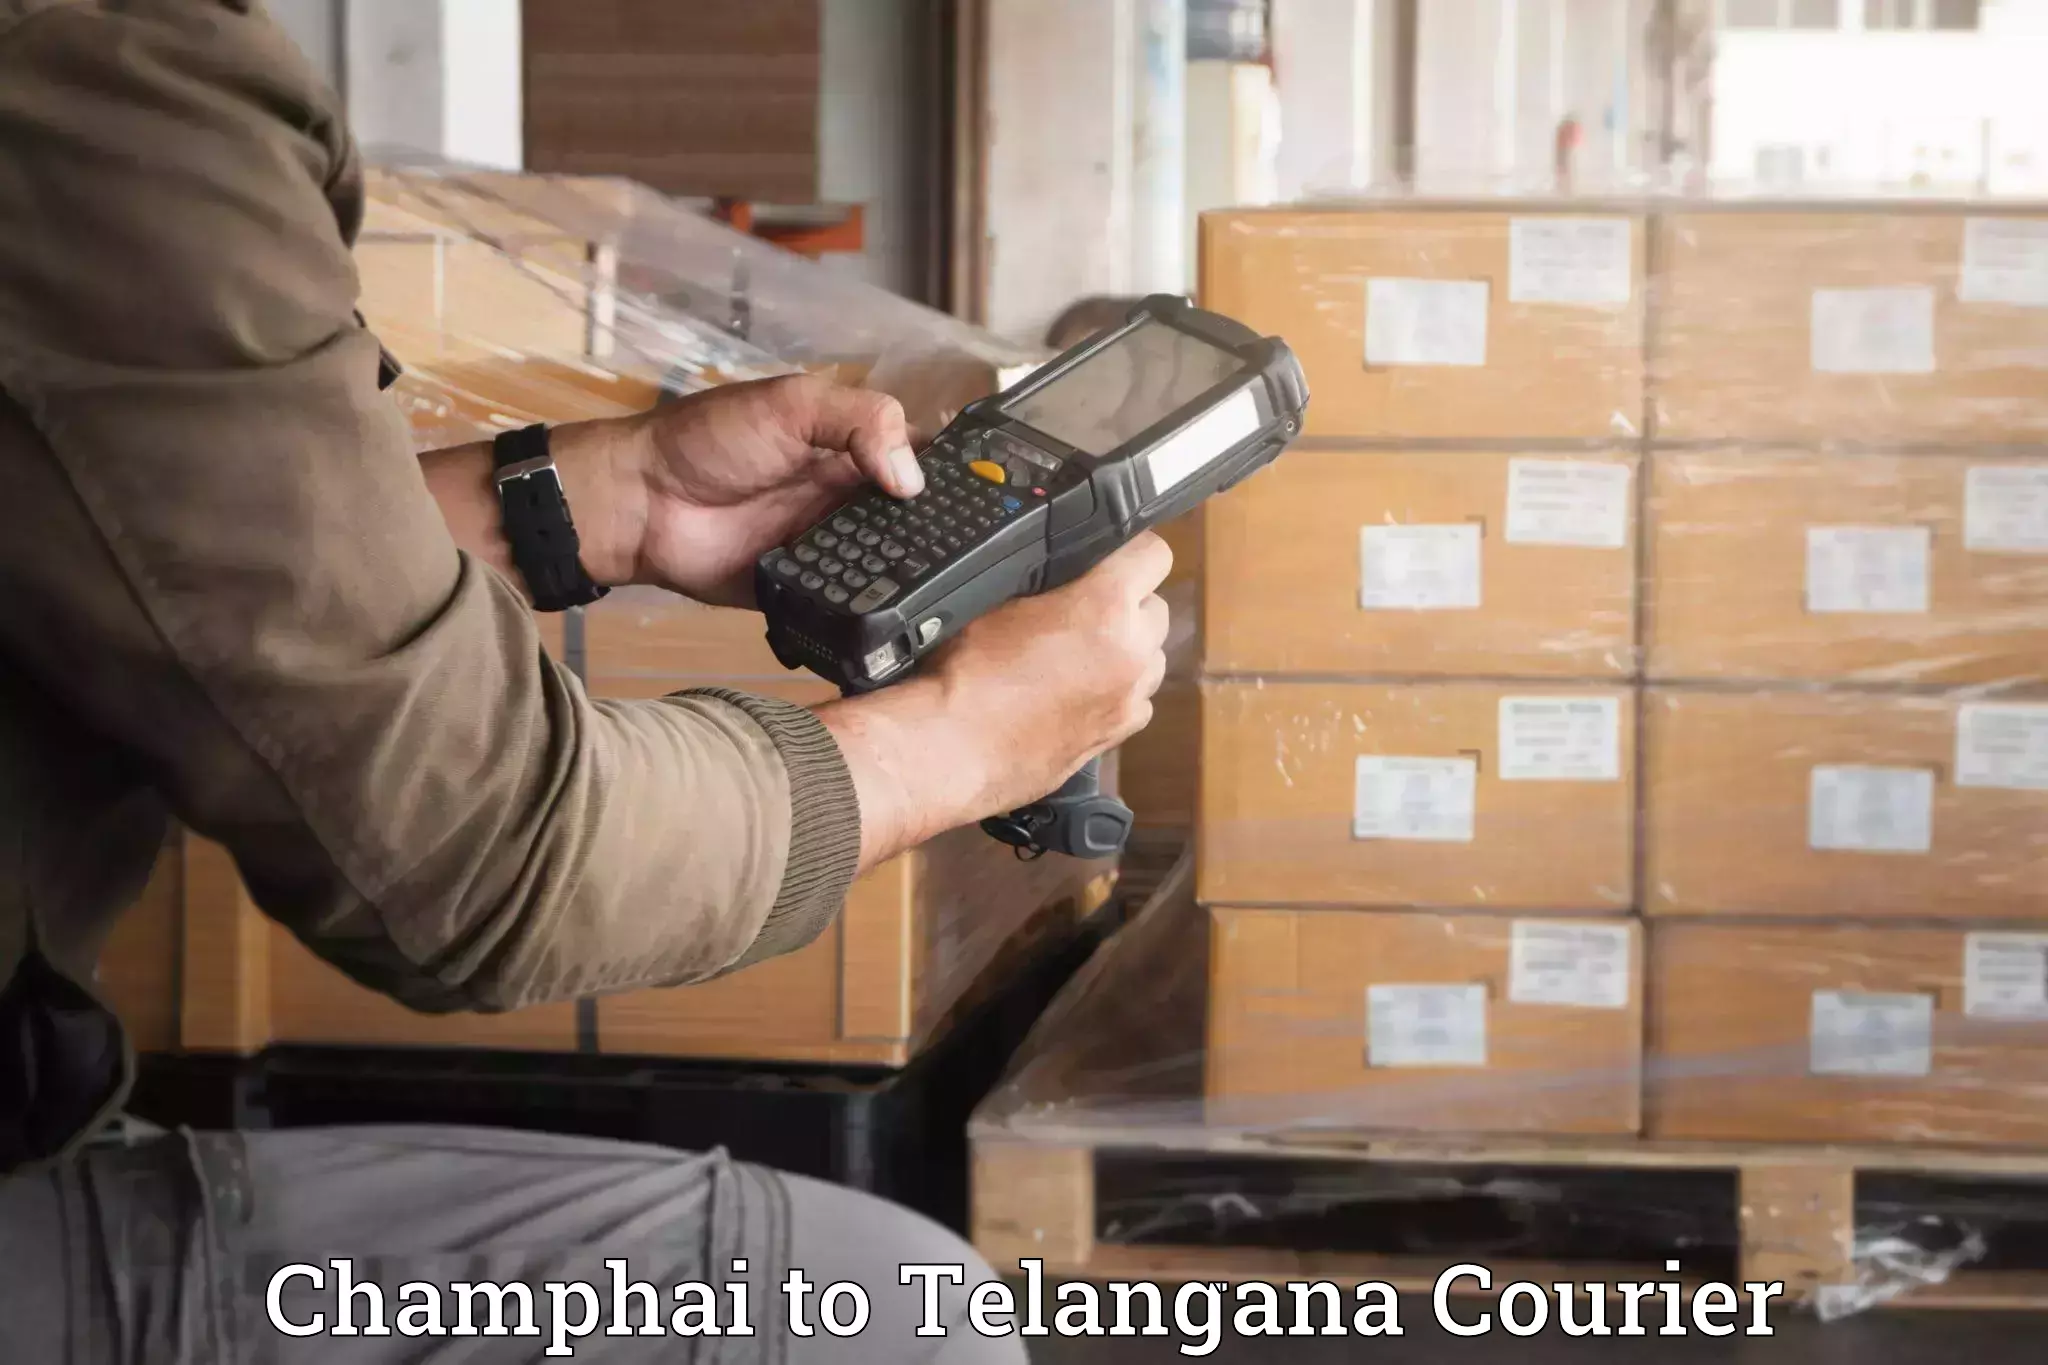 Comprehensive moving assistance in Champhai to Aswaraopeta